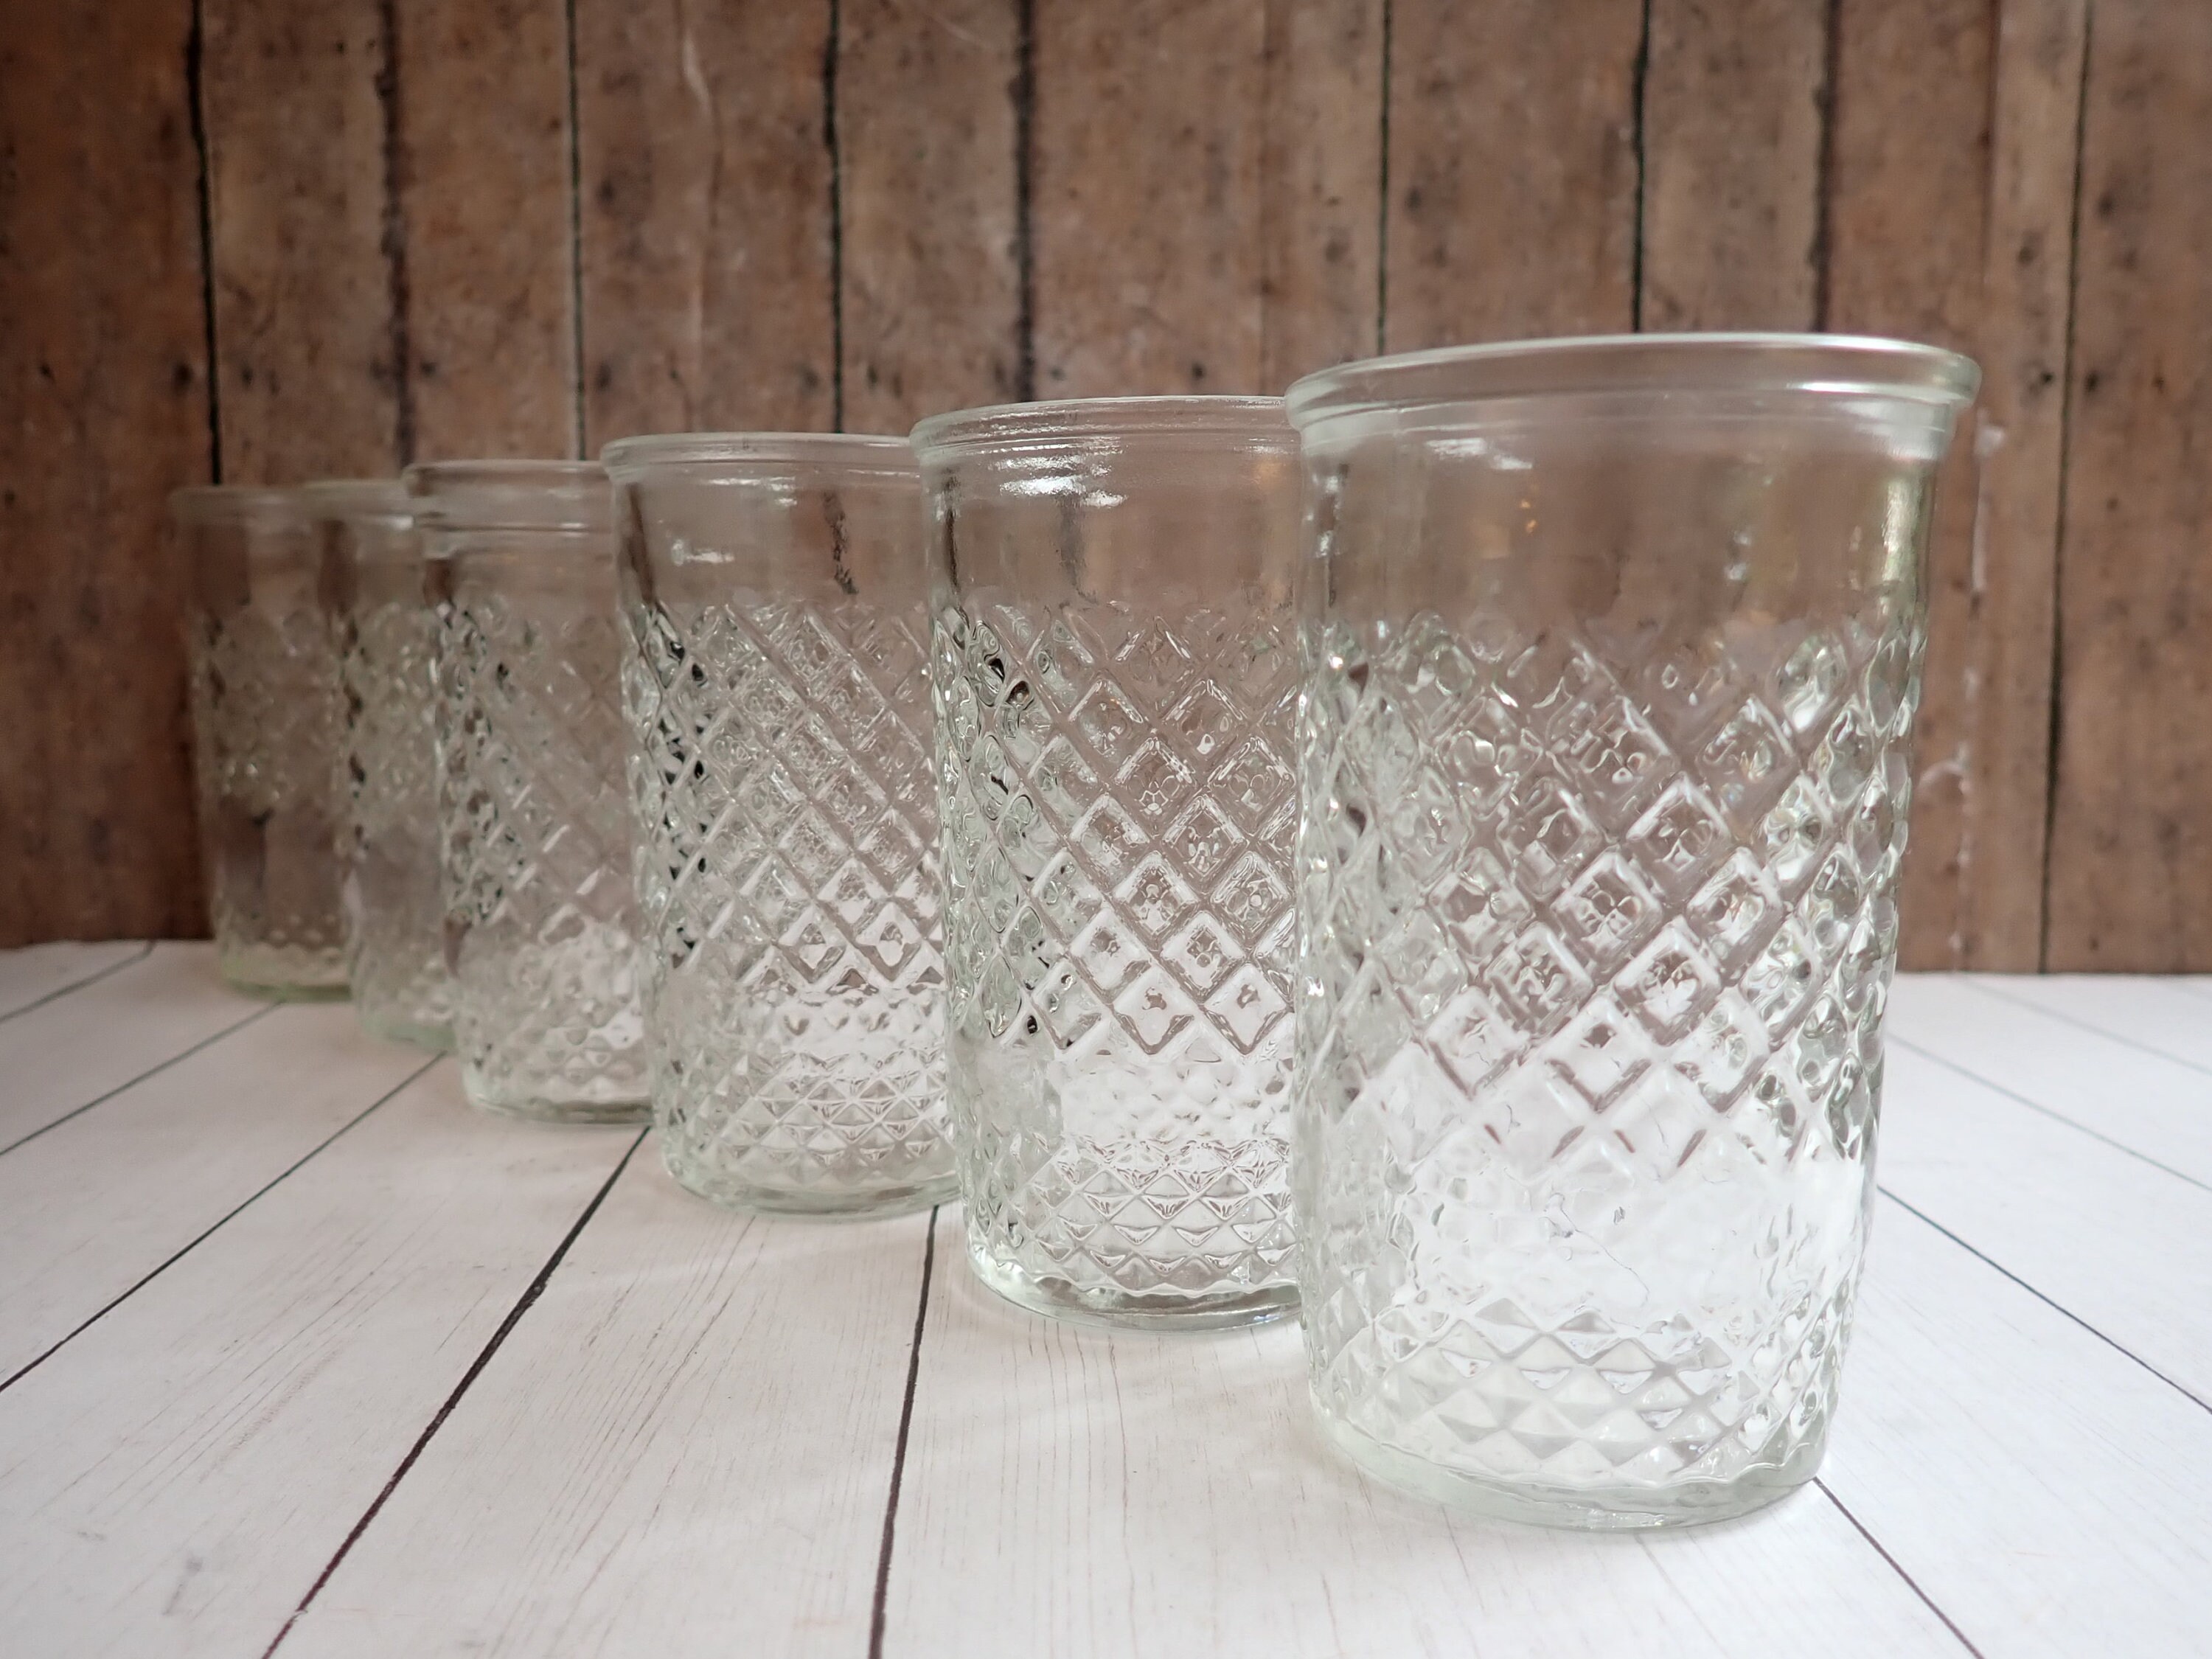 Vintage Jelly Jar Juice Glasses Small Tumblers Set of 4 Diamond Design  Clear Drinking Glass Wexford Style 